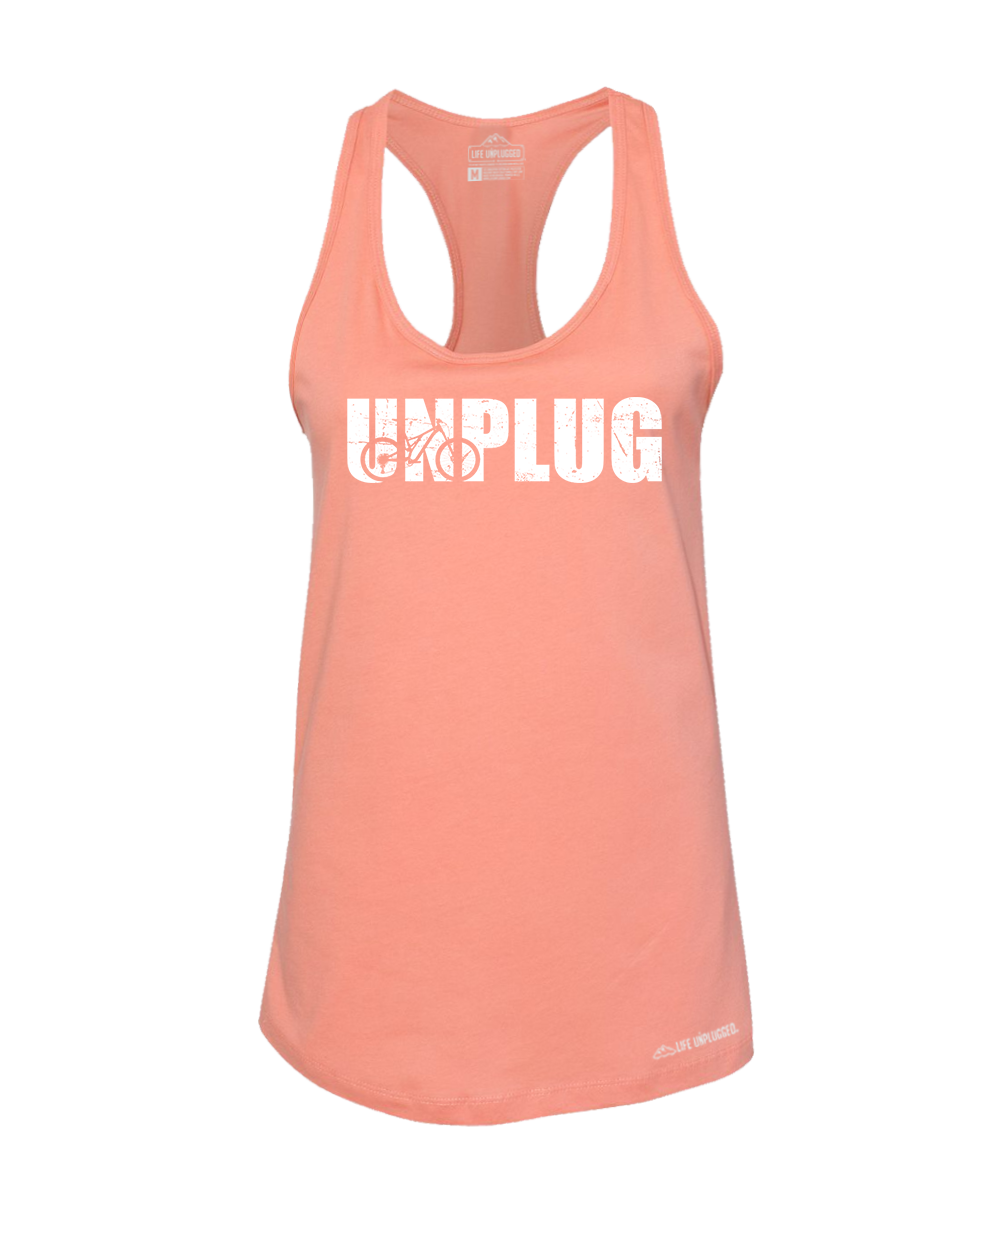 Unplug Mountain Bike Silhouette Premium Women's Relaxed Fit Racerback Tank Top - Life Unplugged